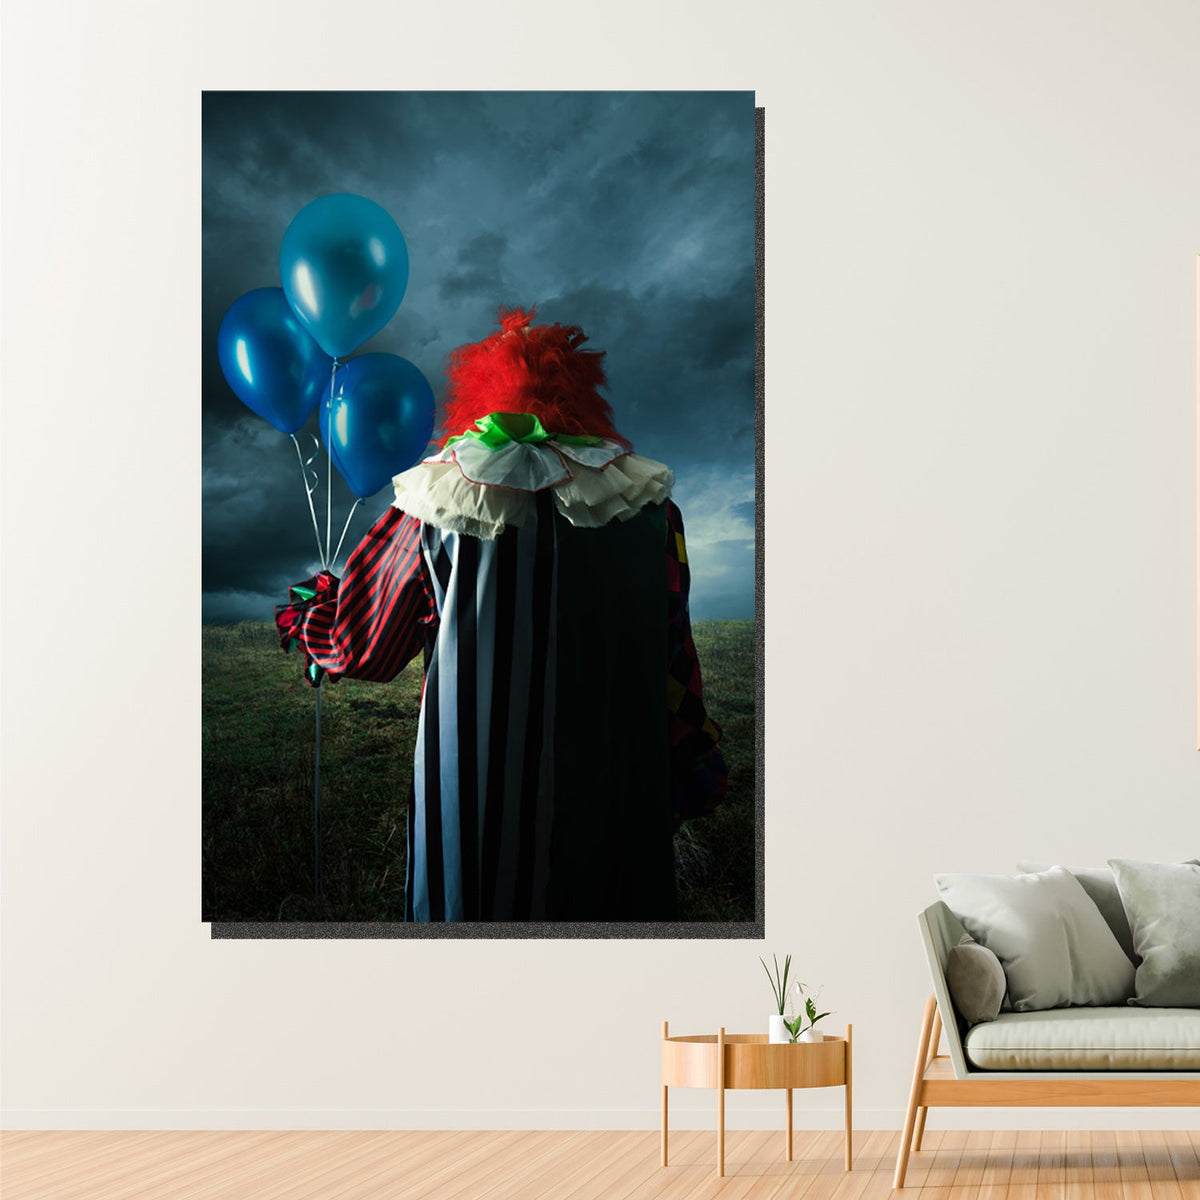 https://cdn.shopify.com/s/files/1/0387/9986/8044/products/ScaryClownCanvasArtprintStretched-2.jpg